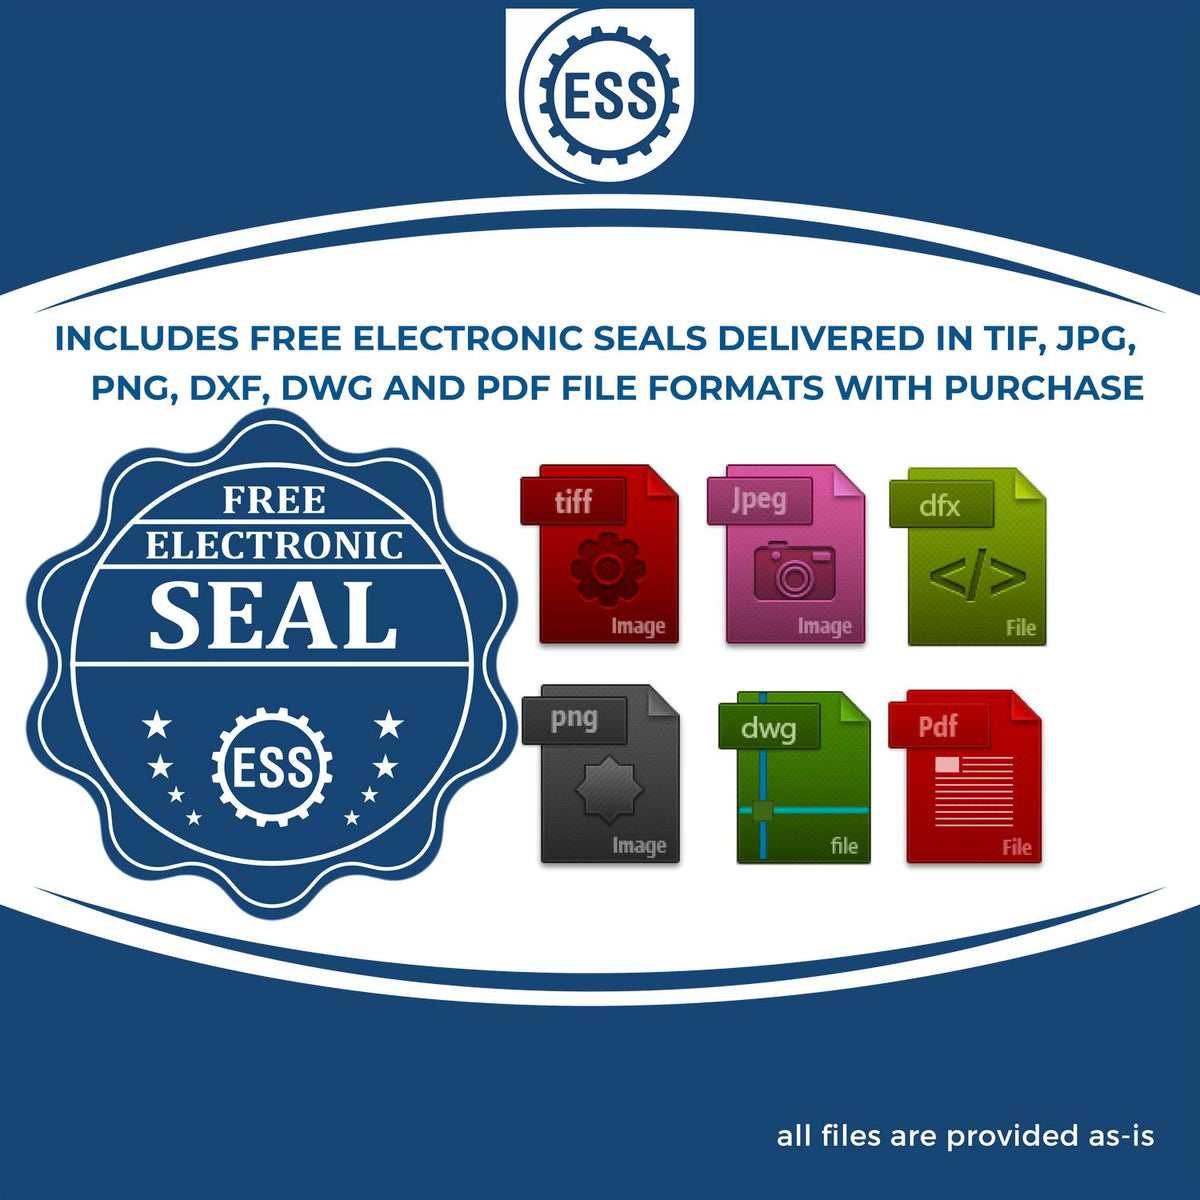 An infographic for the free electronic seal for the North Carolina Professional Engineer Seal Stamp illustrating the different file type icons such as DXF, DWG, TIF, JPG and PNG.